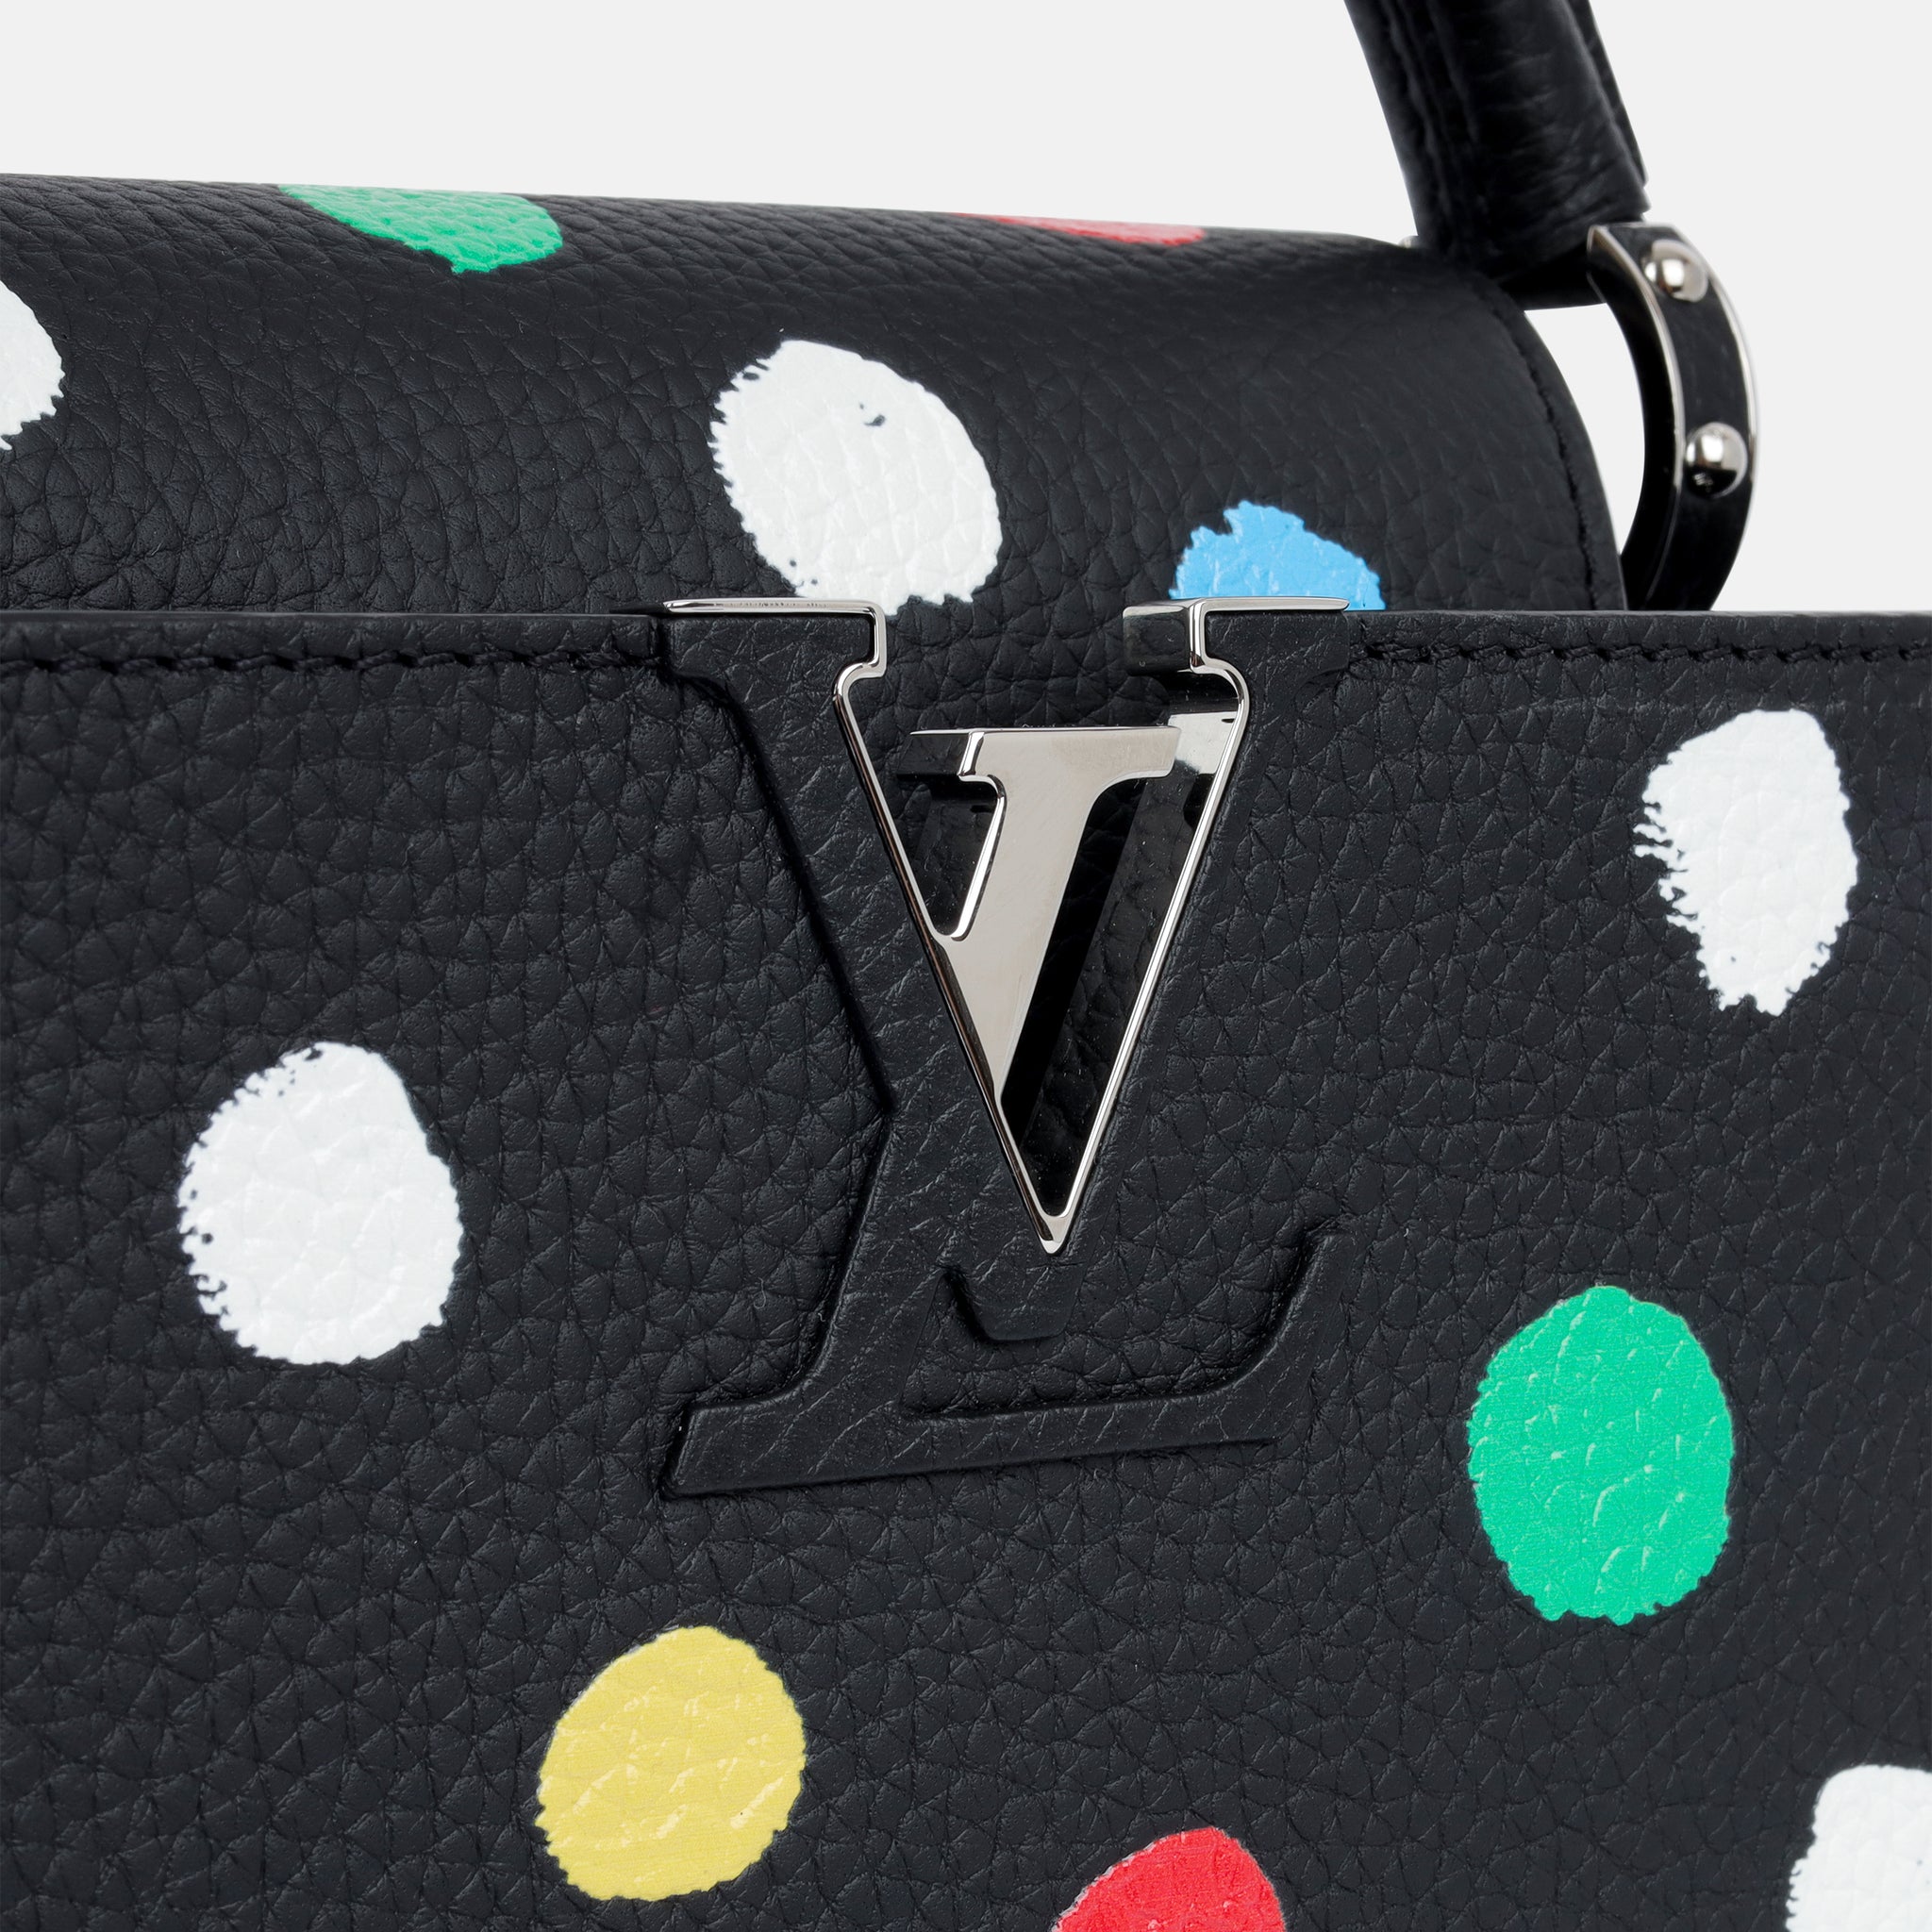 Louis Vuitton x Yayoi Kusama Capucines BB Black/White in Taurillon Bull  Calfskin Leather with Silver-tone - US